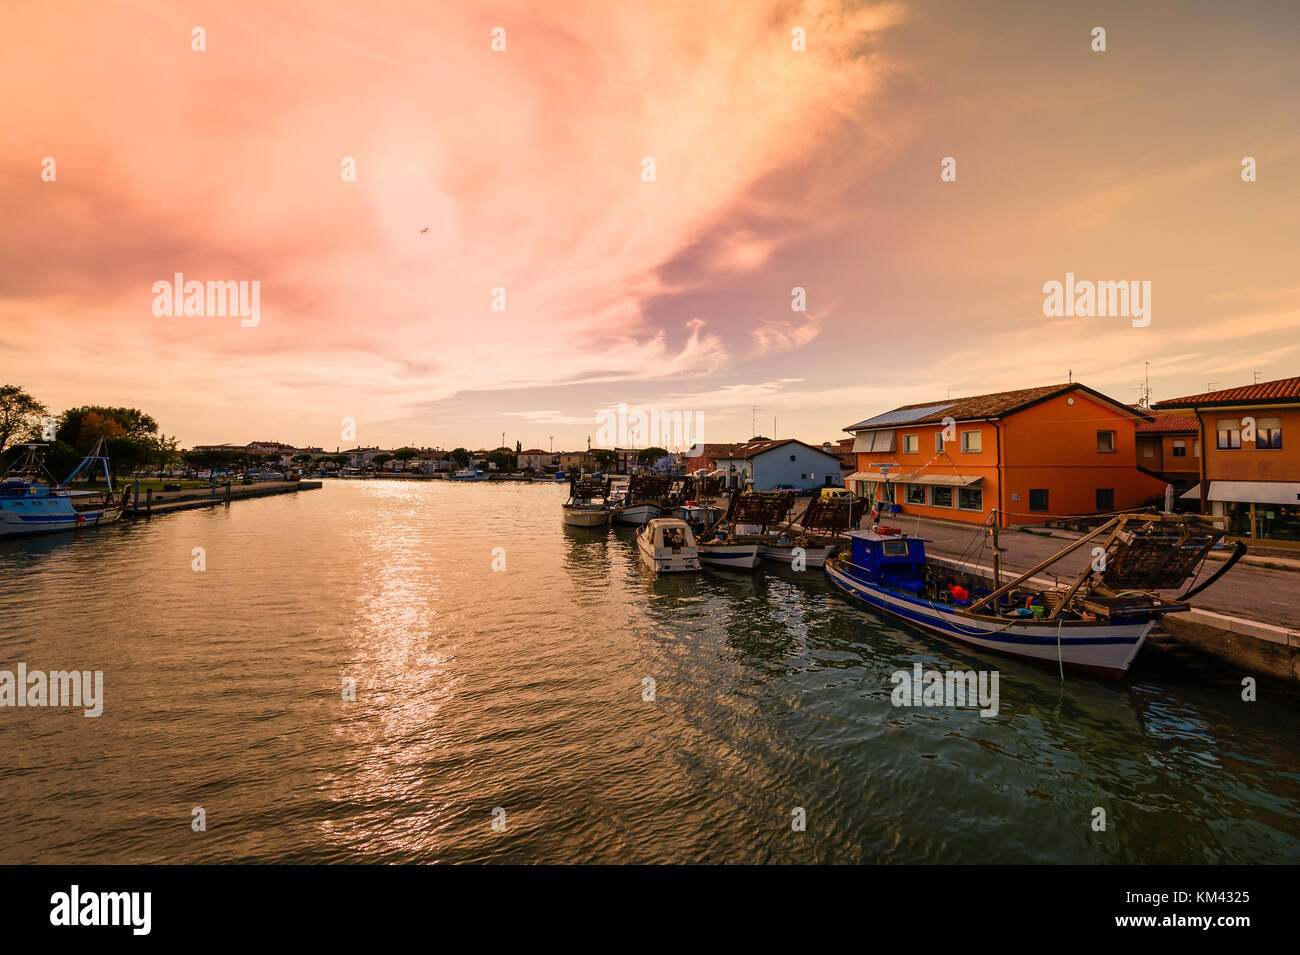 Fishing boats moored in the harbor at sunset. Stock Photo